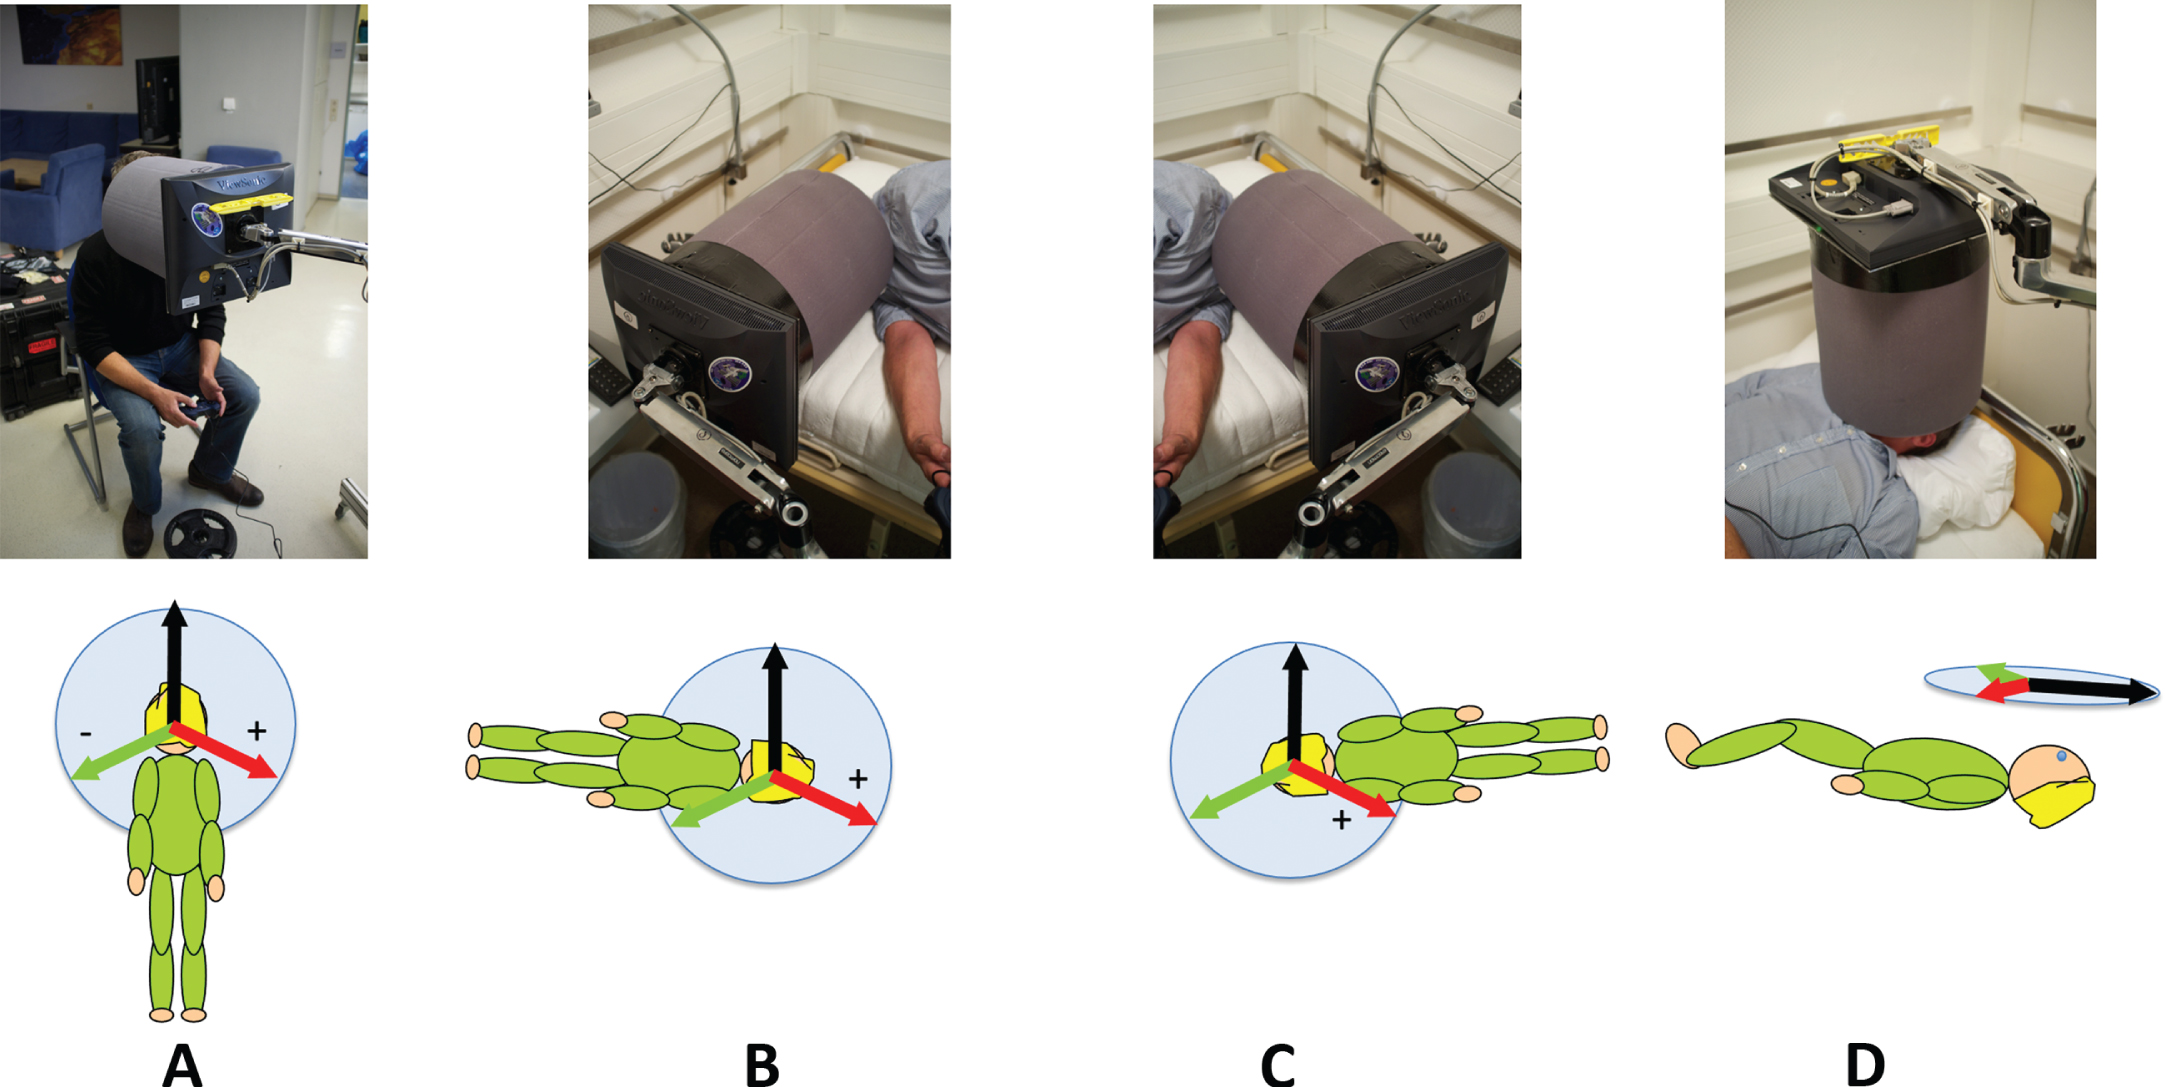 The body orientations and equipment used in this study. The viewing tube and monitor isolated the participant’s view of stimuli from the outside world (A) upright, (B) right side down (RSD), (C) left side down (LSD), and (D) supine. Beneath each photograph is a diagram indicating the orientation of the three visual backgrounds used.